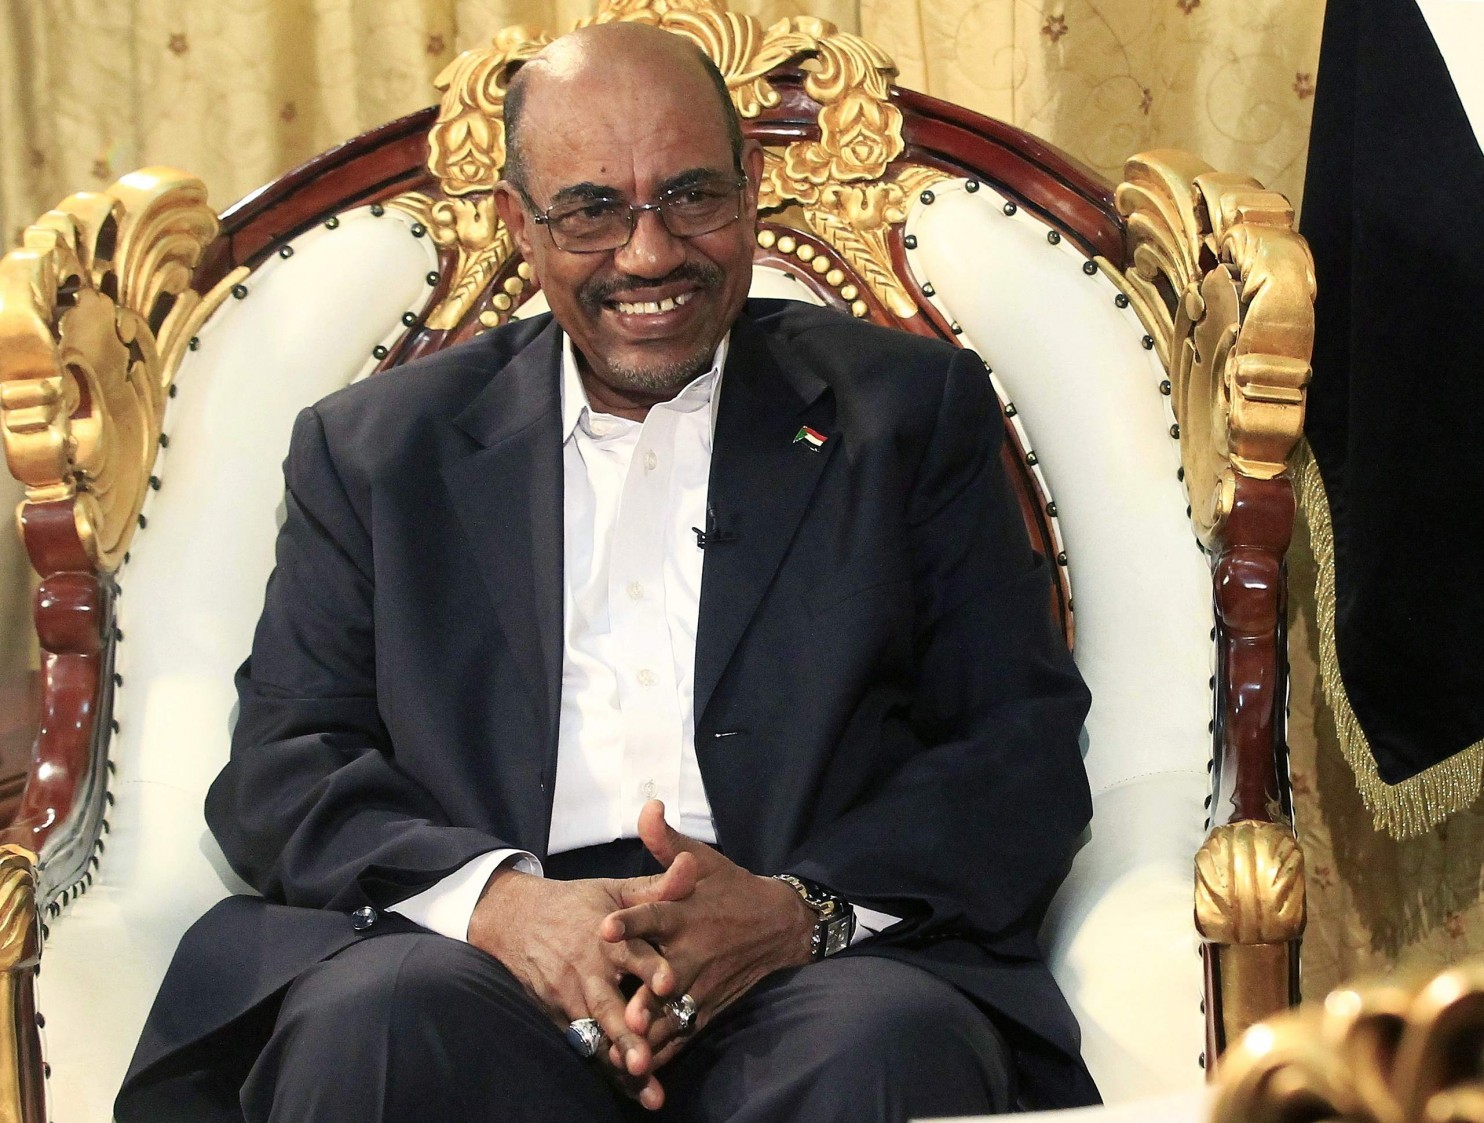 Sudan's President Omar al-Bashir smiles during an interview with the Russia Today news channel at the Presidential Palace in Khartoum, December 3, 2014. (Mohamed Nureldin Abdallah/Reuters)